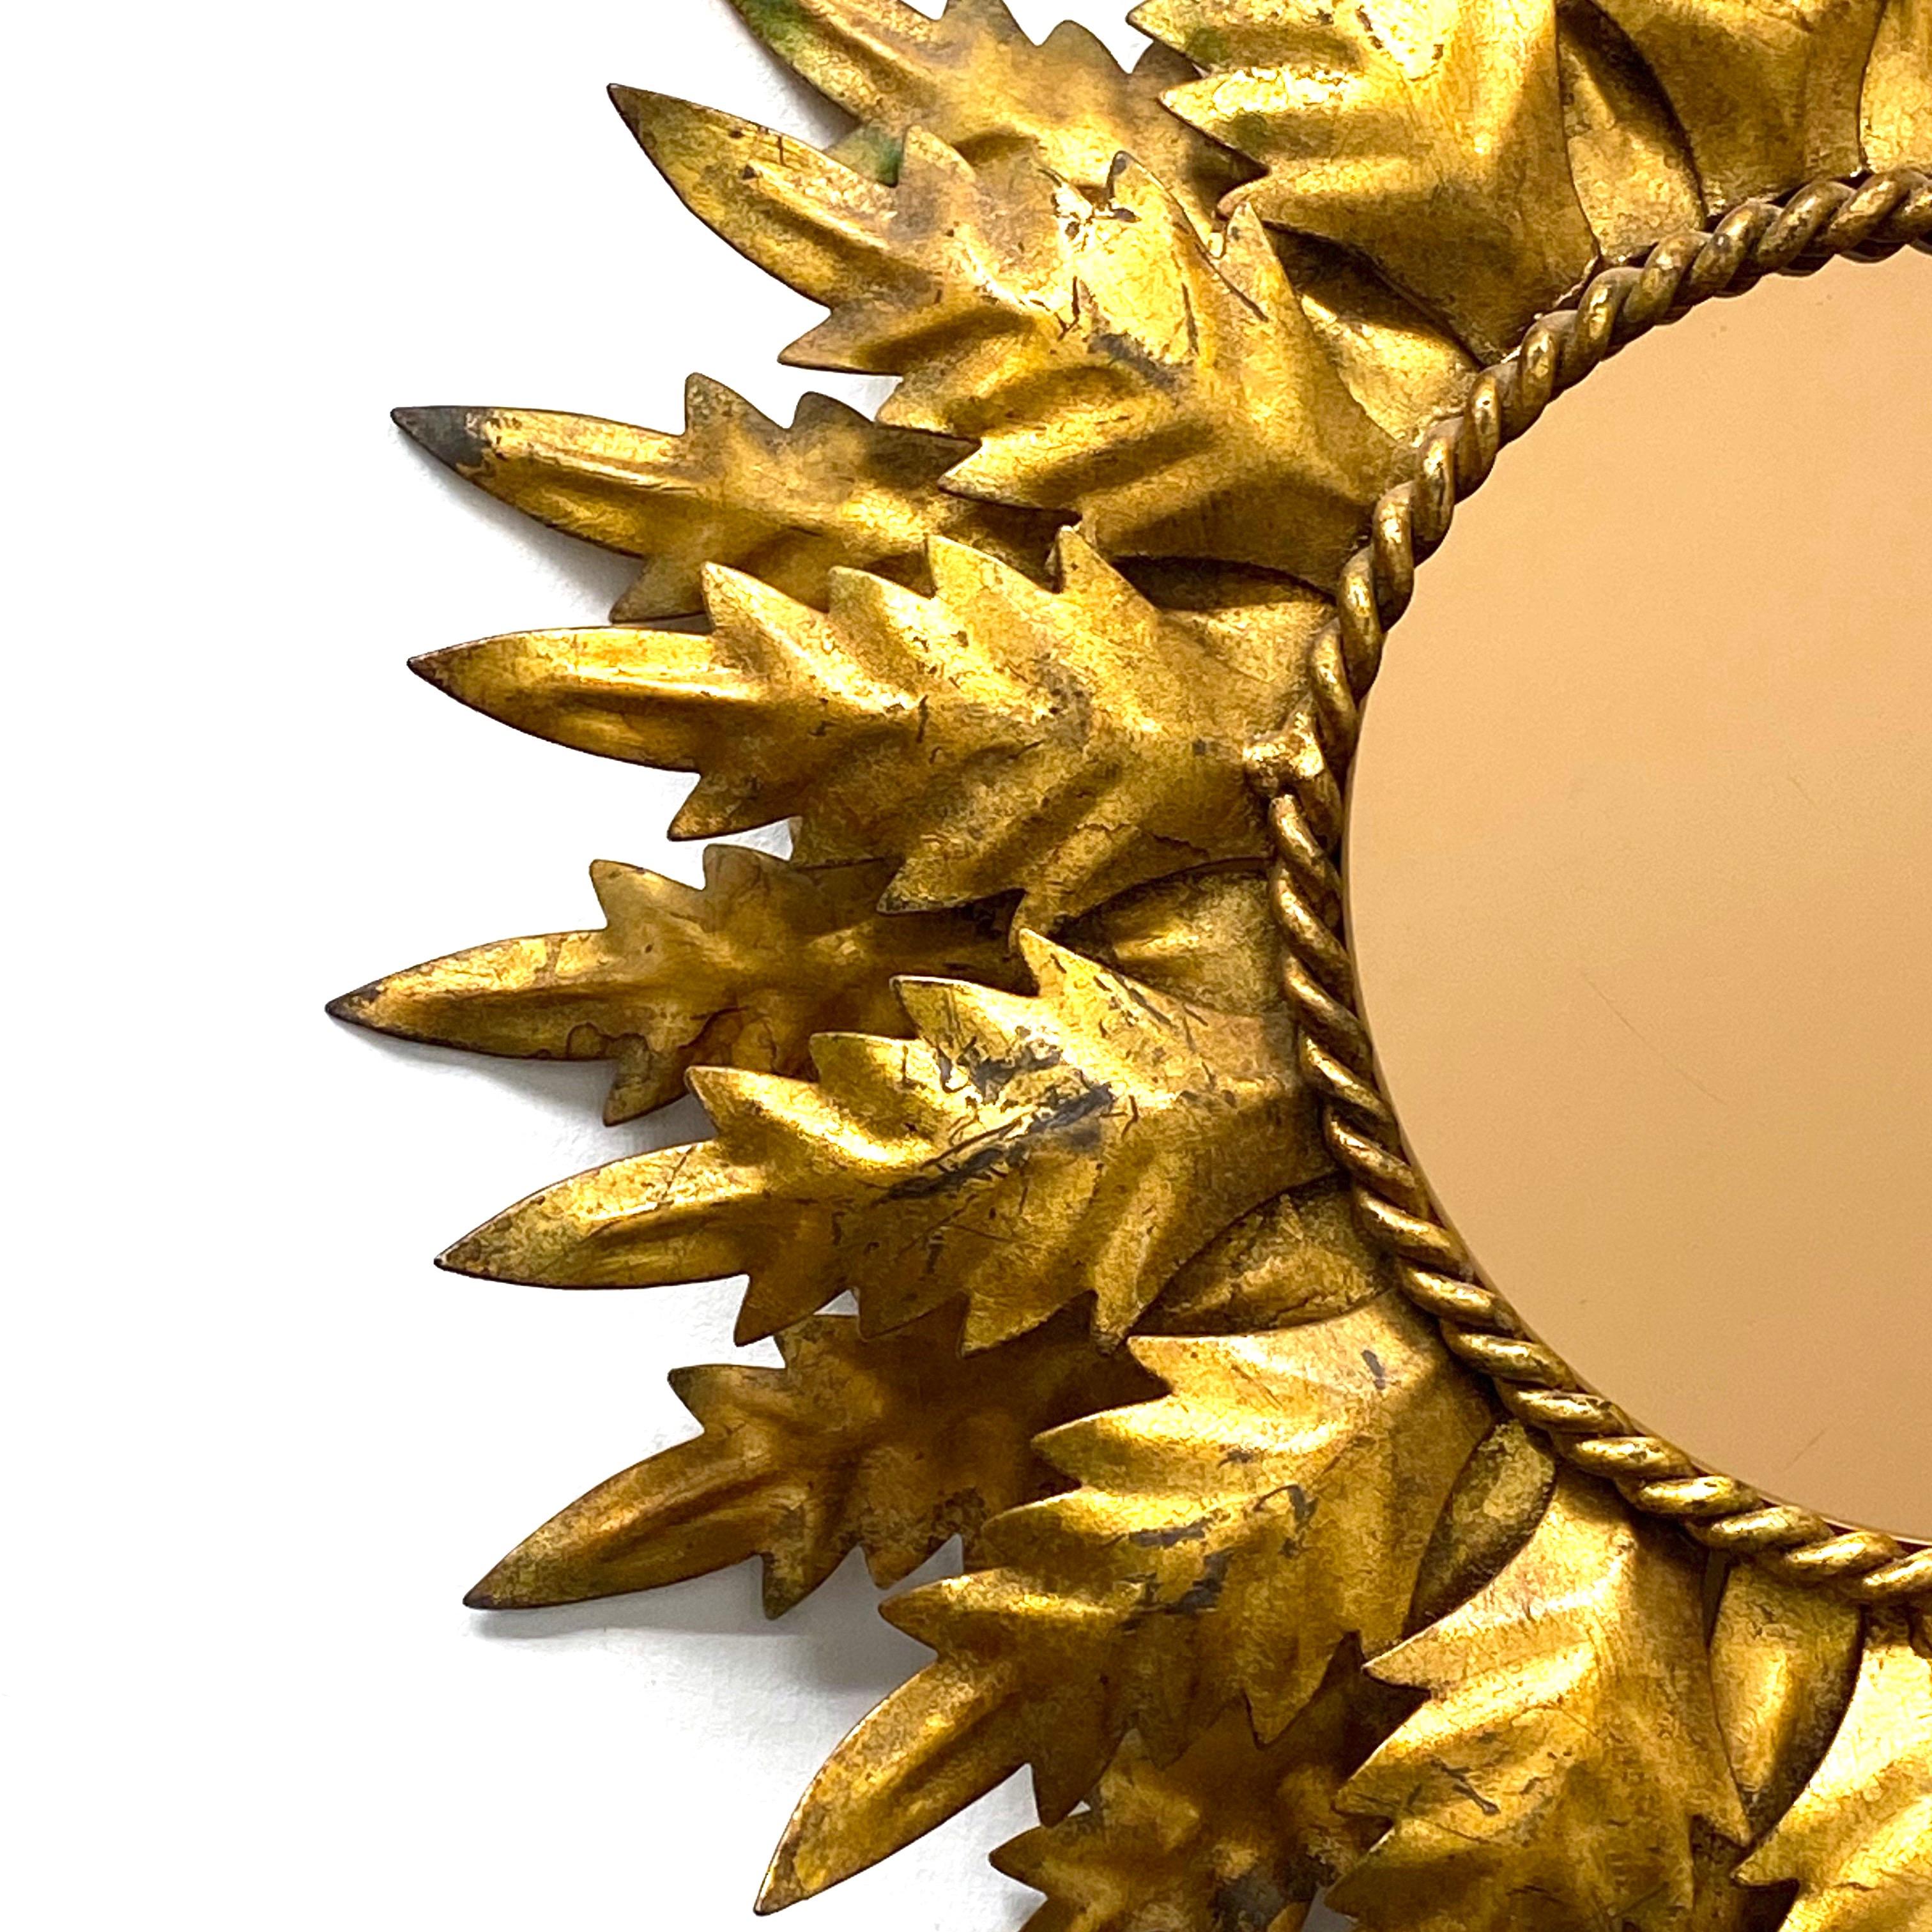 A gorgeous starburst sunburst leafed frame mirror. Made of gild metal attributed to Koegl Germany. It measures approximate 19